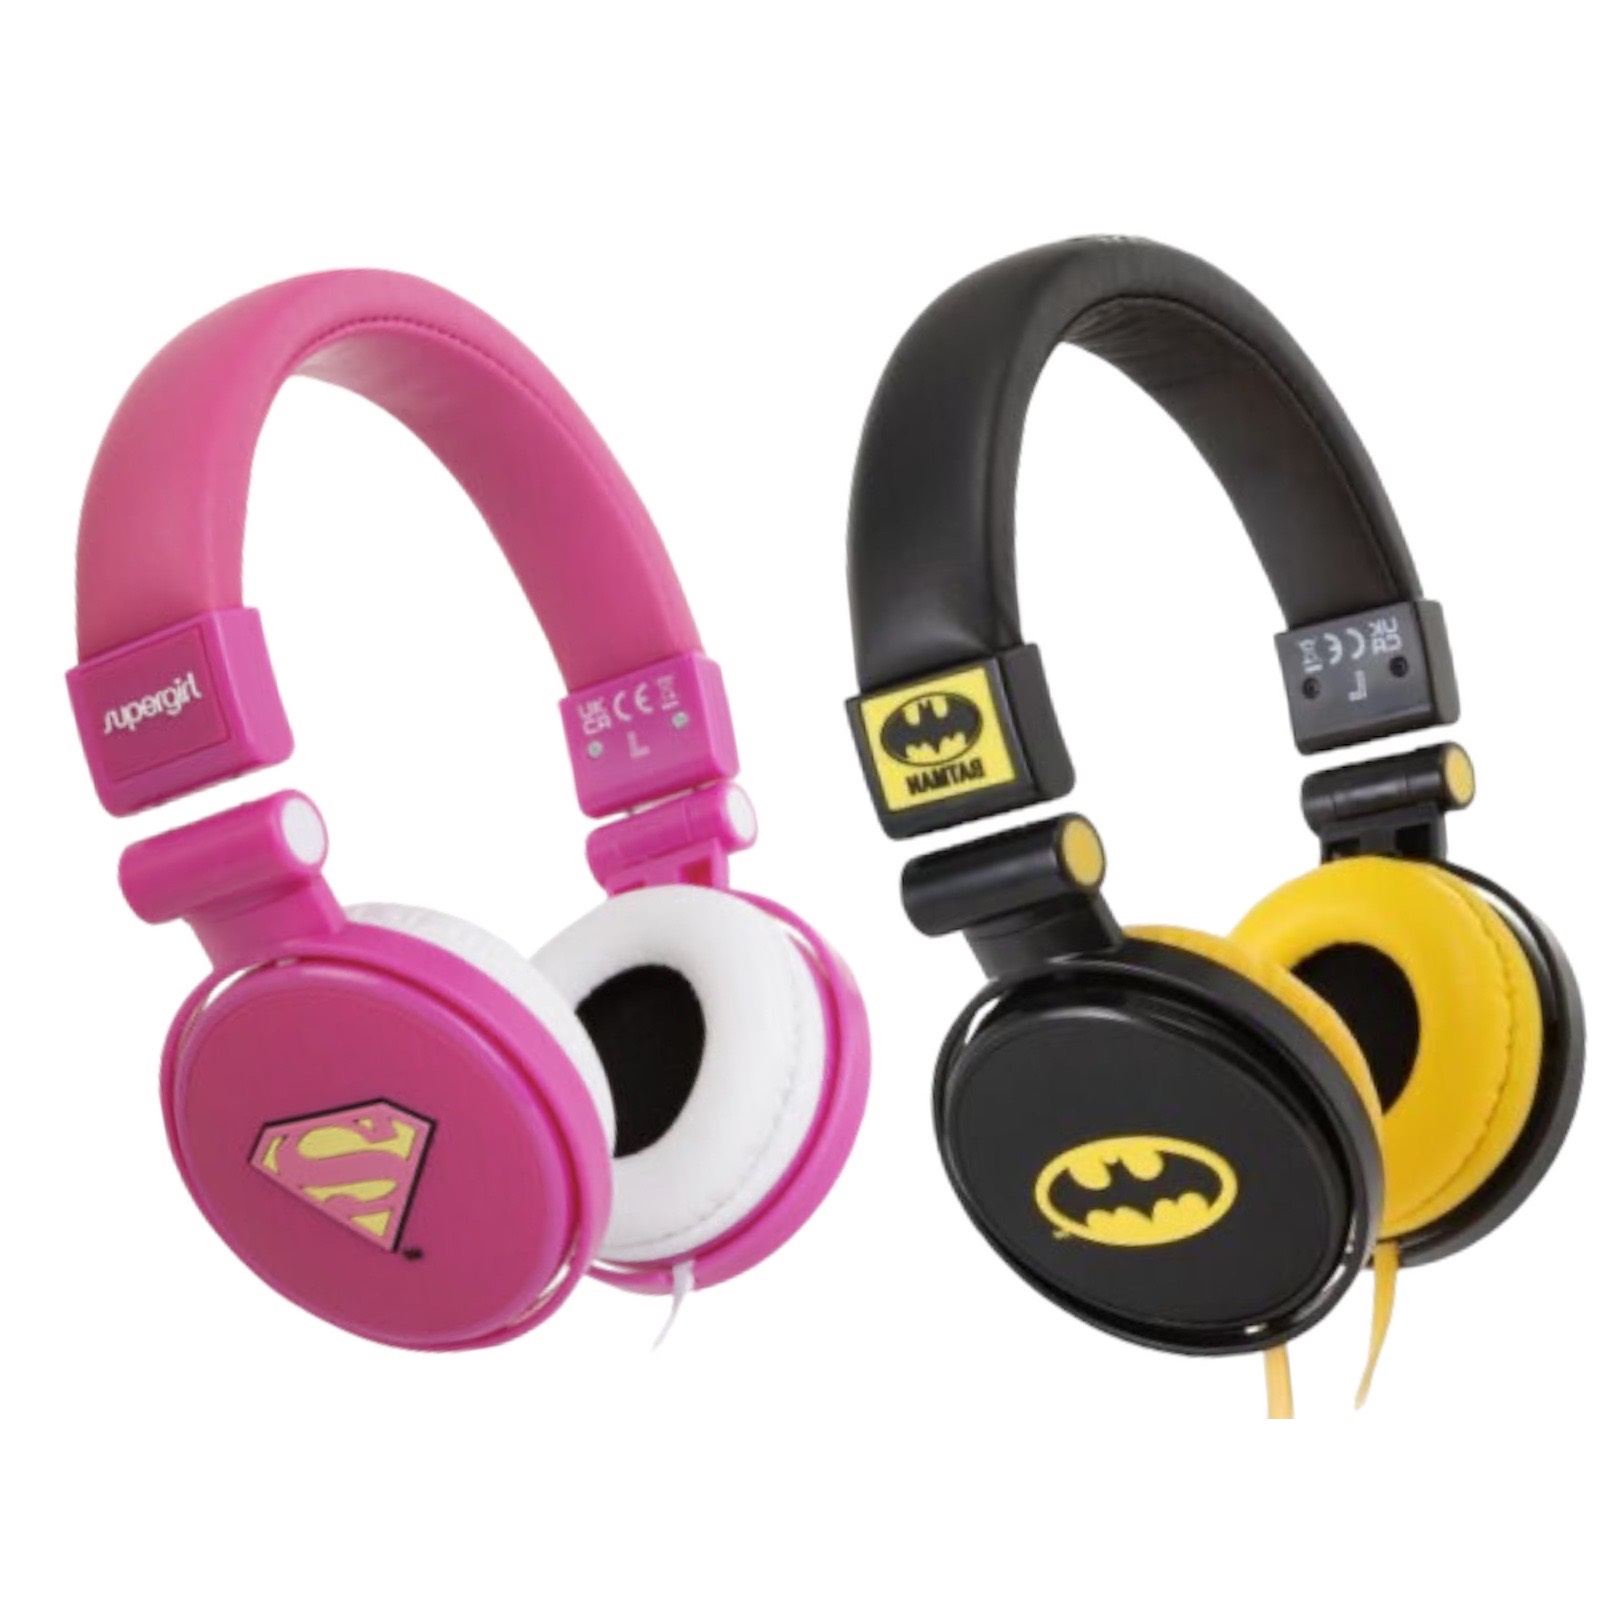 Kids Batman and Supergirl Wired Headphones (100 of each) - Perfect Gift and Travel Must Have